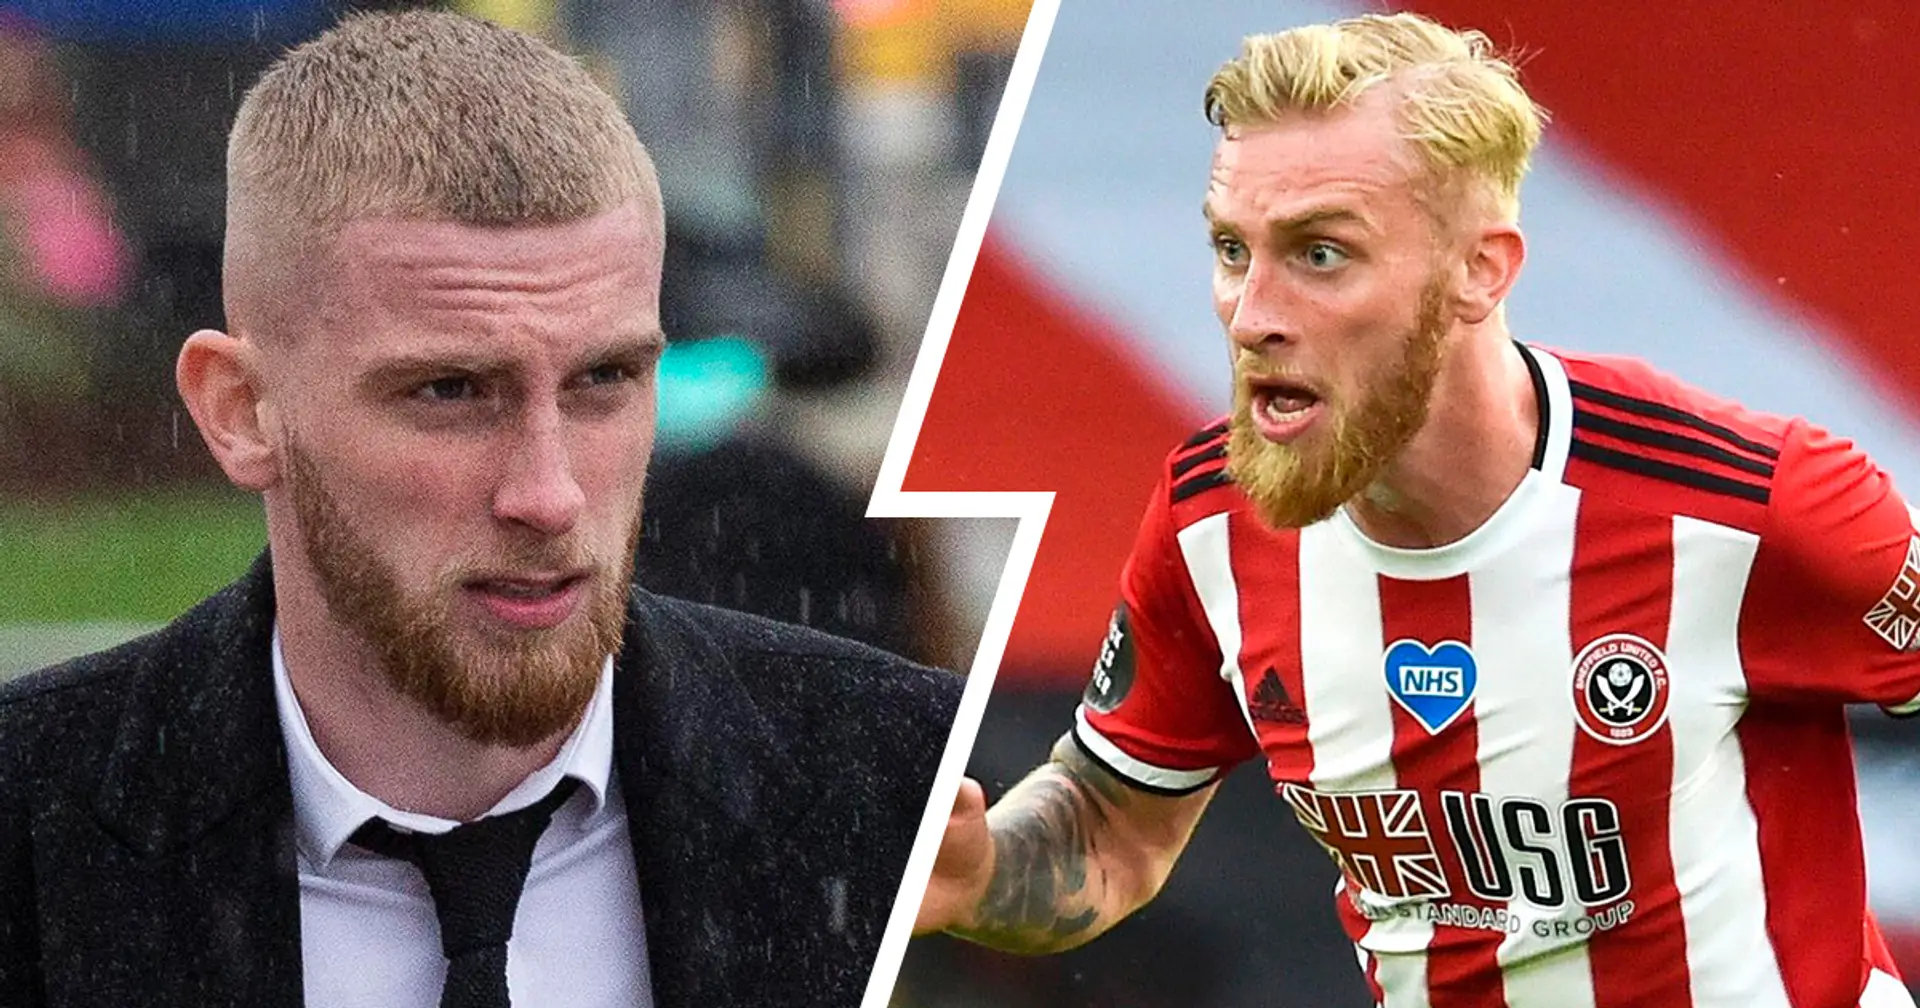 Sheffield striker Oli McBurnie fined for drink-driving at 'idiotic' speed